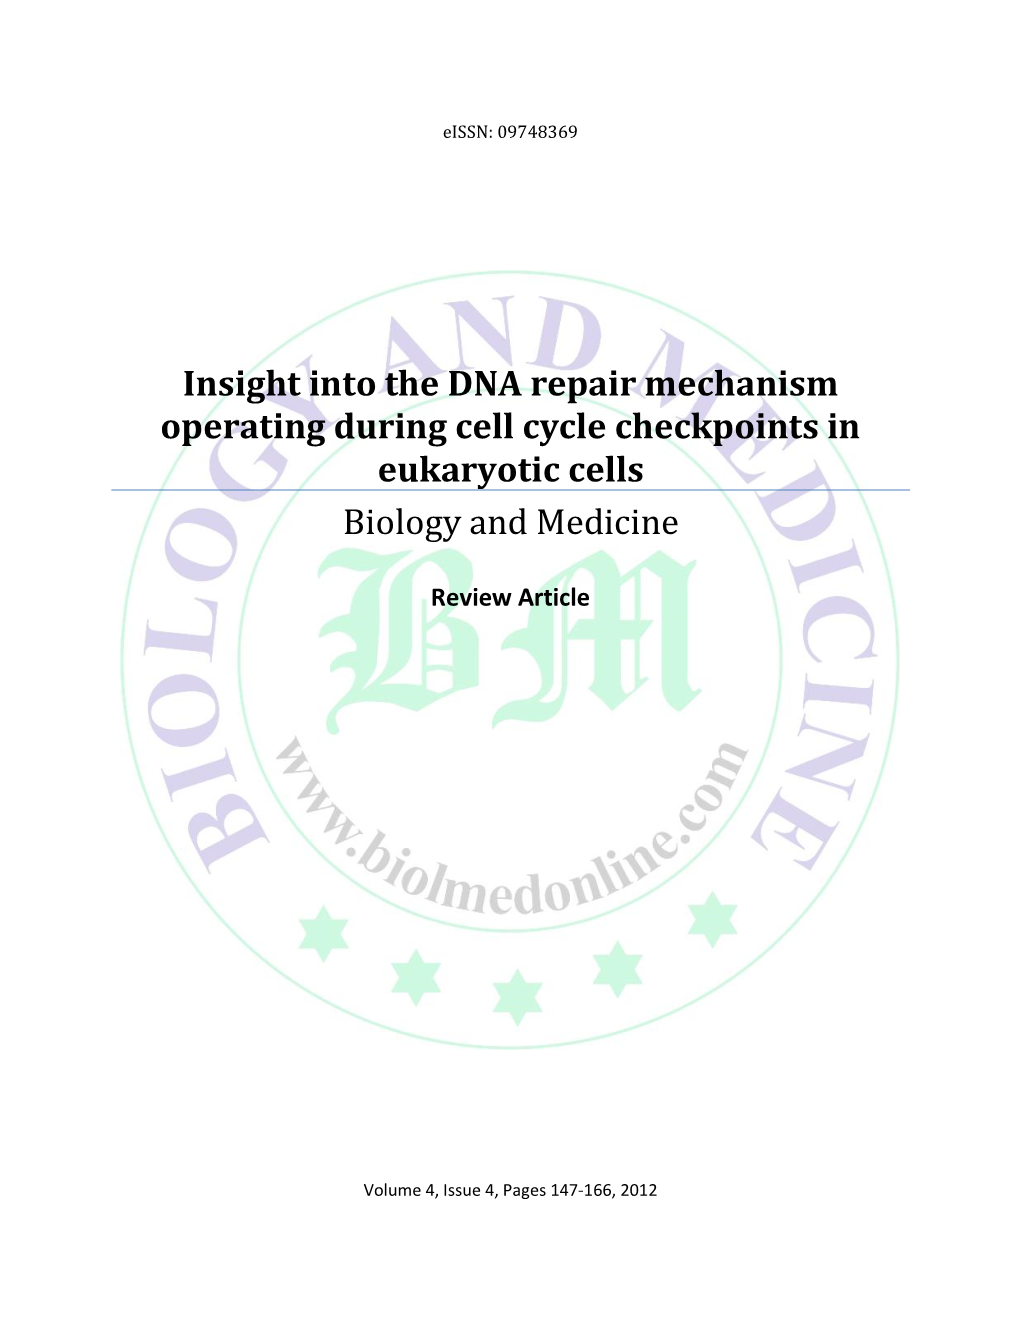 Insight Into the DNA Repair Mechanism Operating During Cell Cycle Checkpoints in Eukaryotic Cells Biology and Medicine